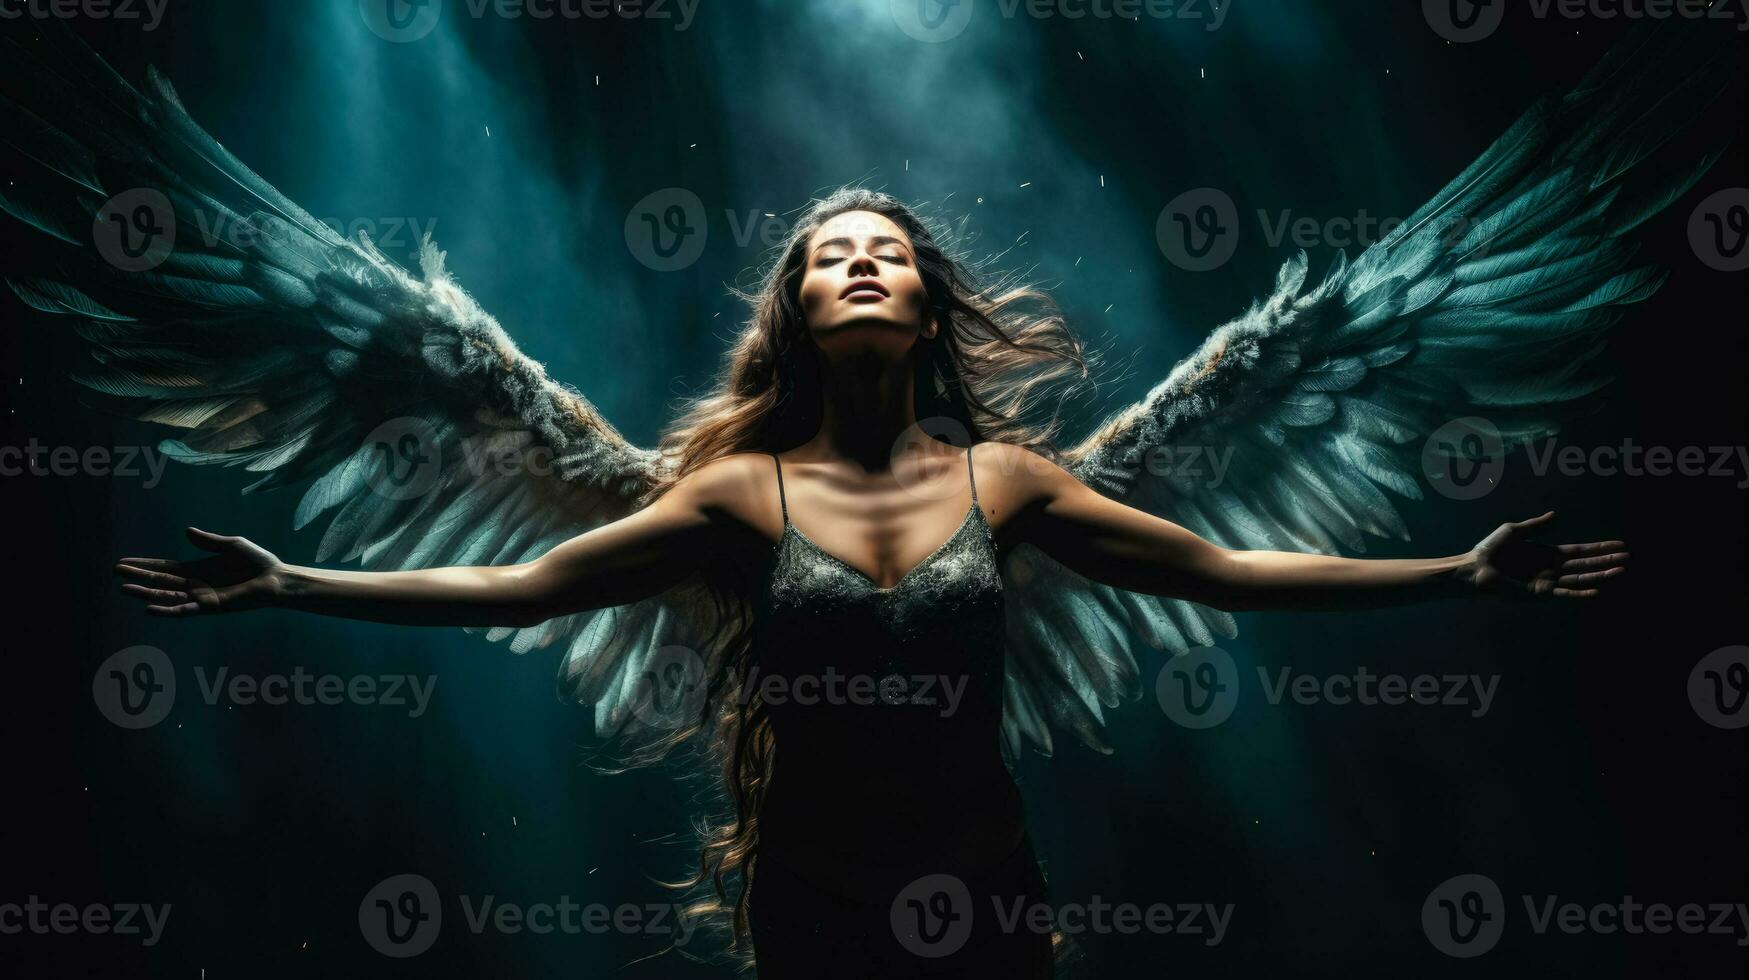 Mystic shocked flying woman beauty on dark background with a place for text photo